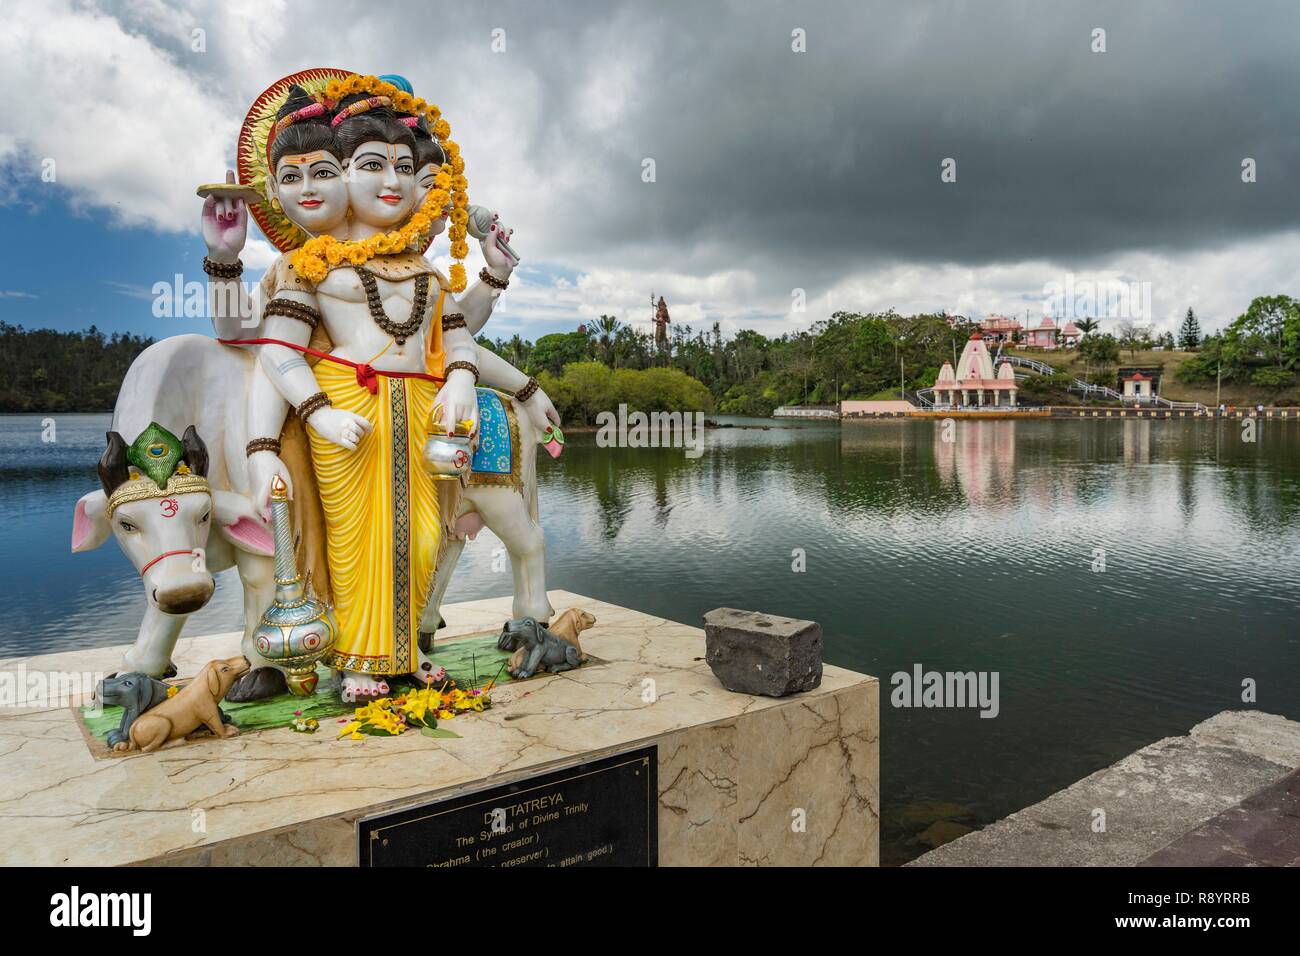 Mauritius, Savanne disctrict, Grand Bassin, crater lake, sacred place of Hinduism, many temples, Brahma Stock Photo